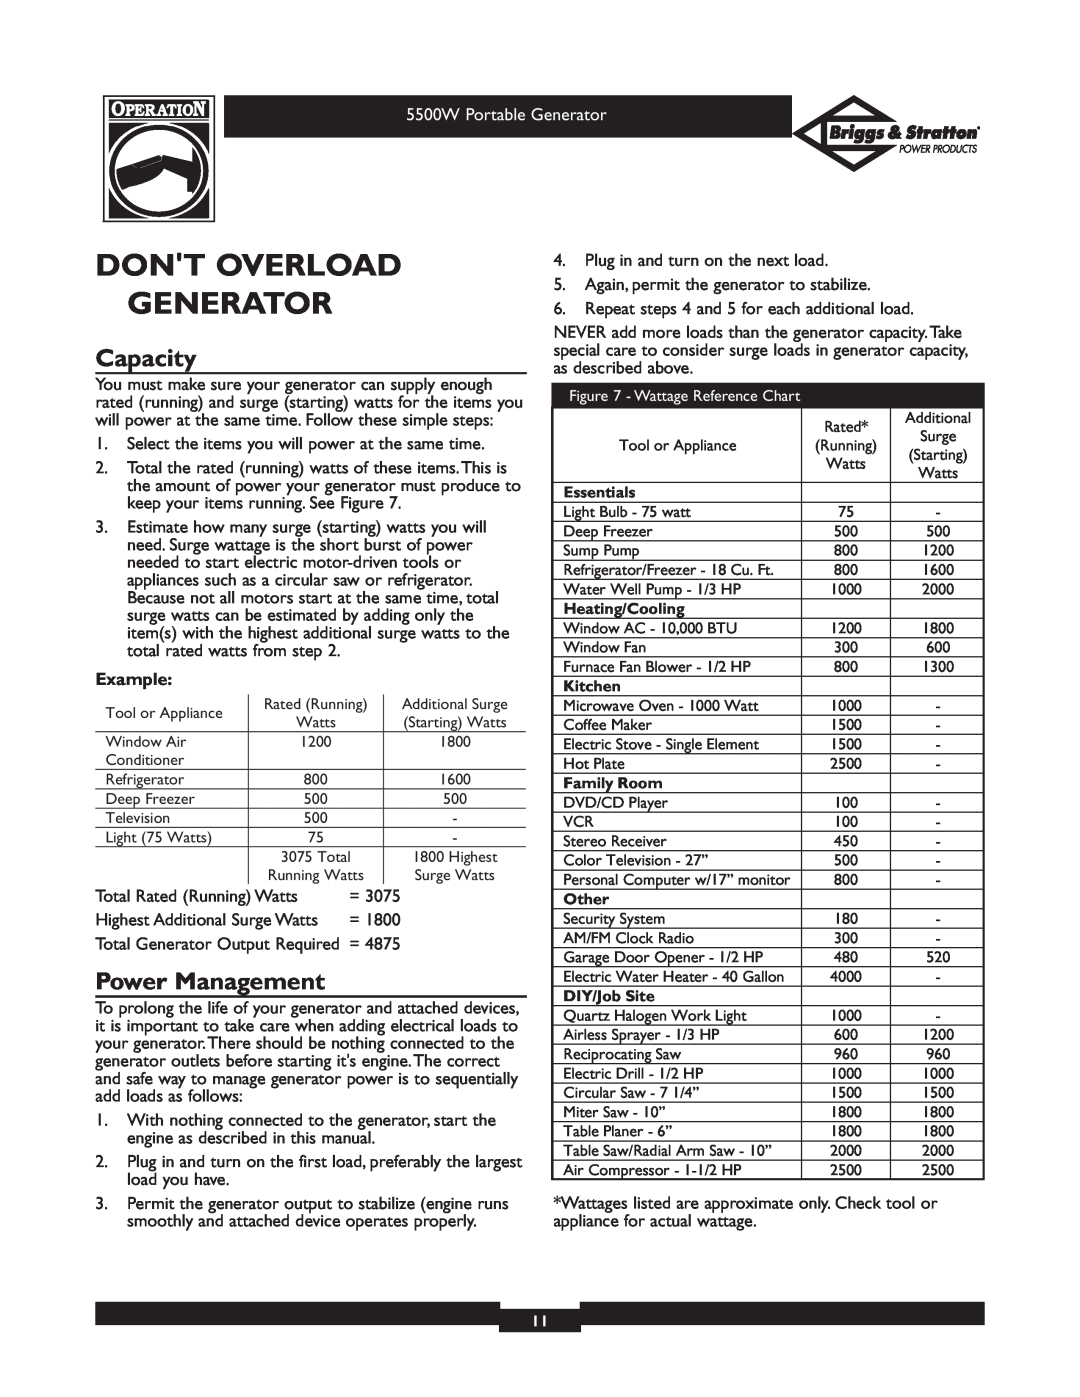 Briggs & Stratton 030209-1 operating instructions Dont Overload Generator, Capacity, Power Management 